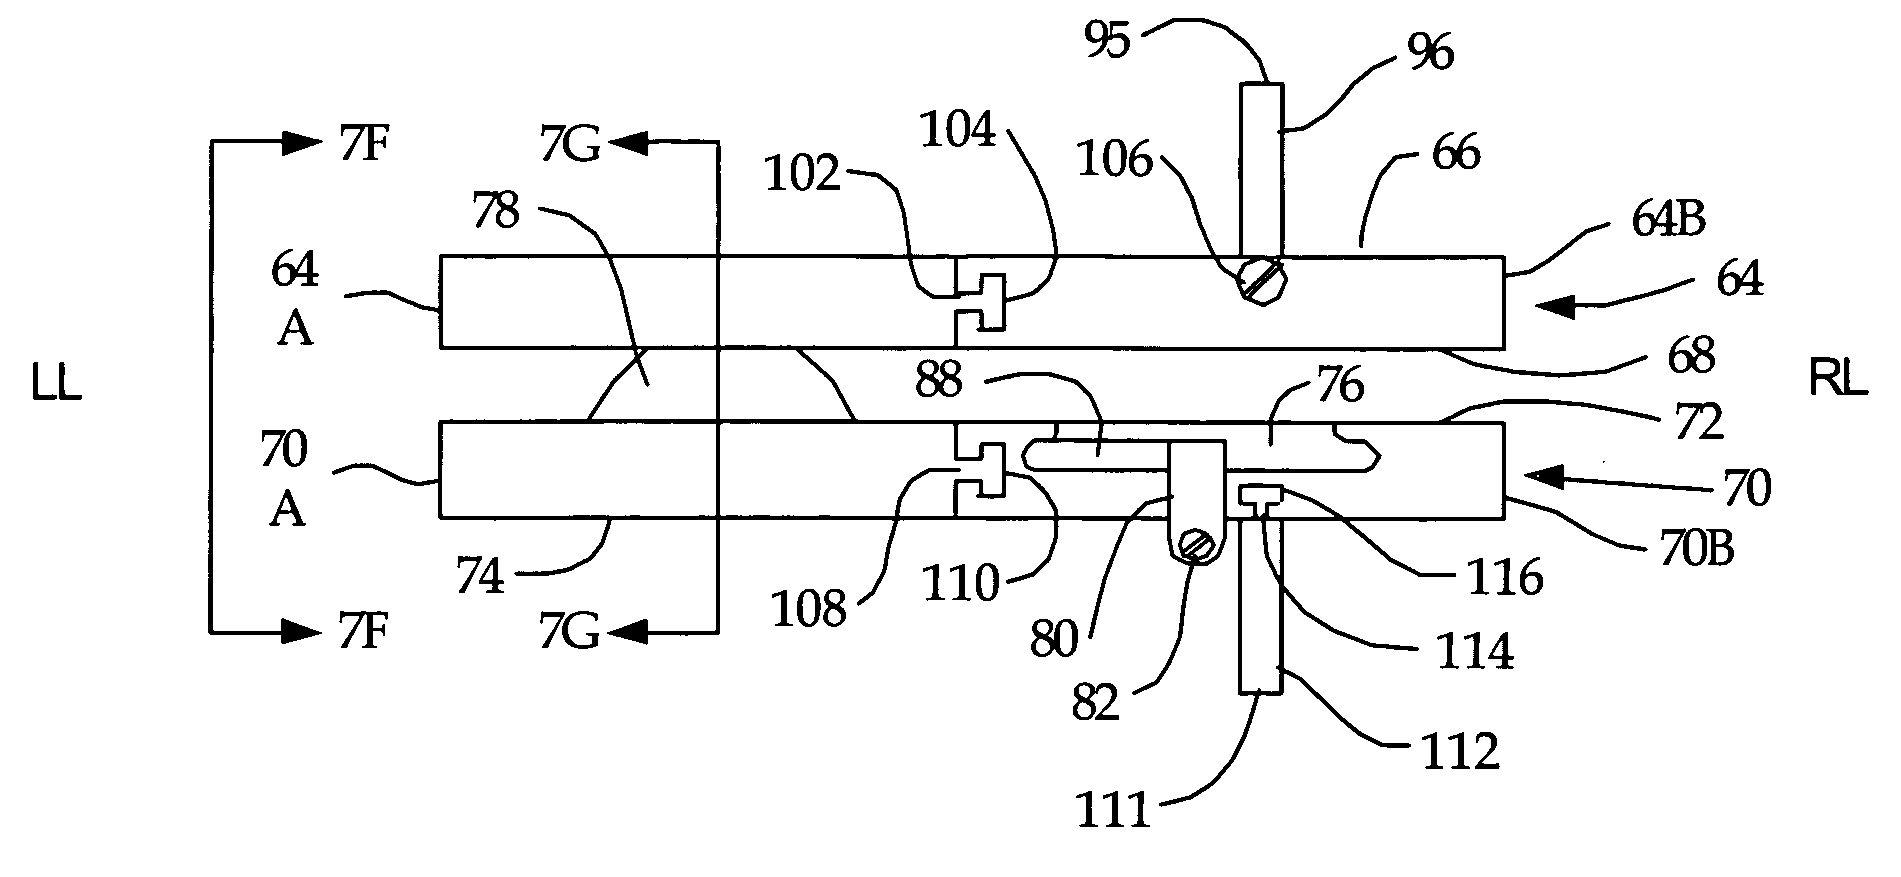 Multi-piece artificial spinal disk replacement device with multi-segmented support plates